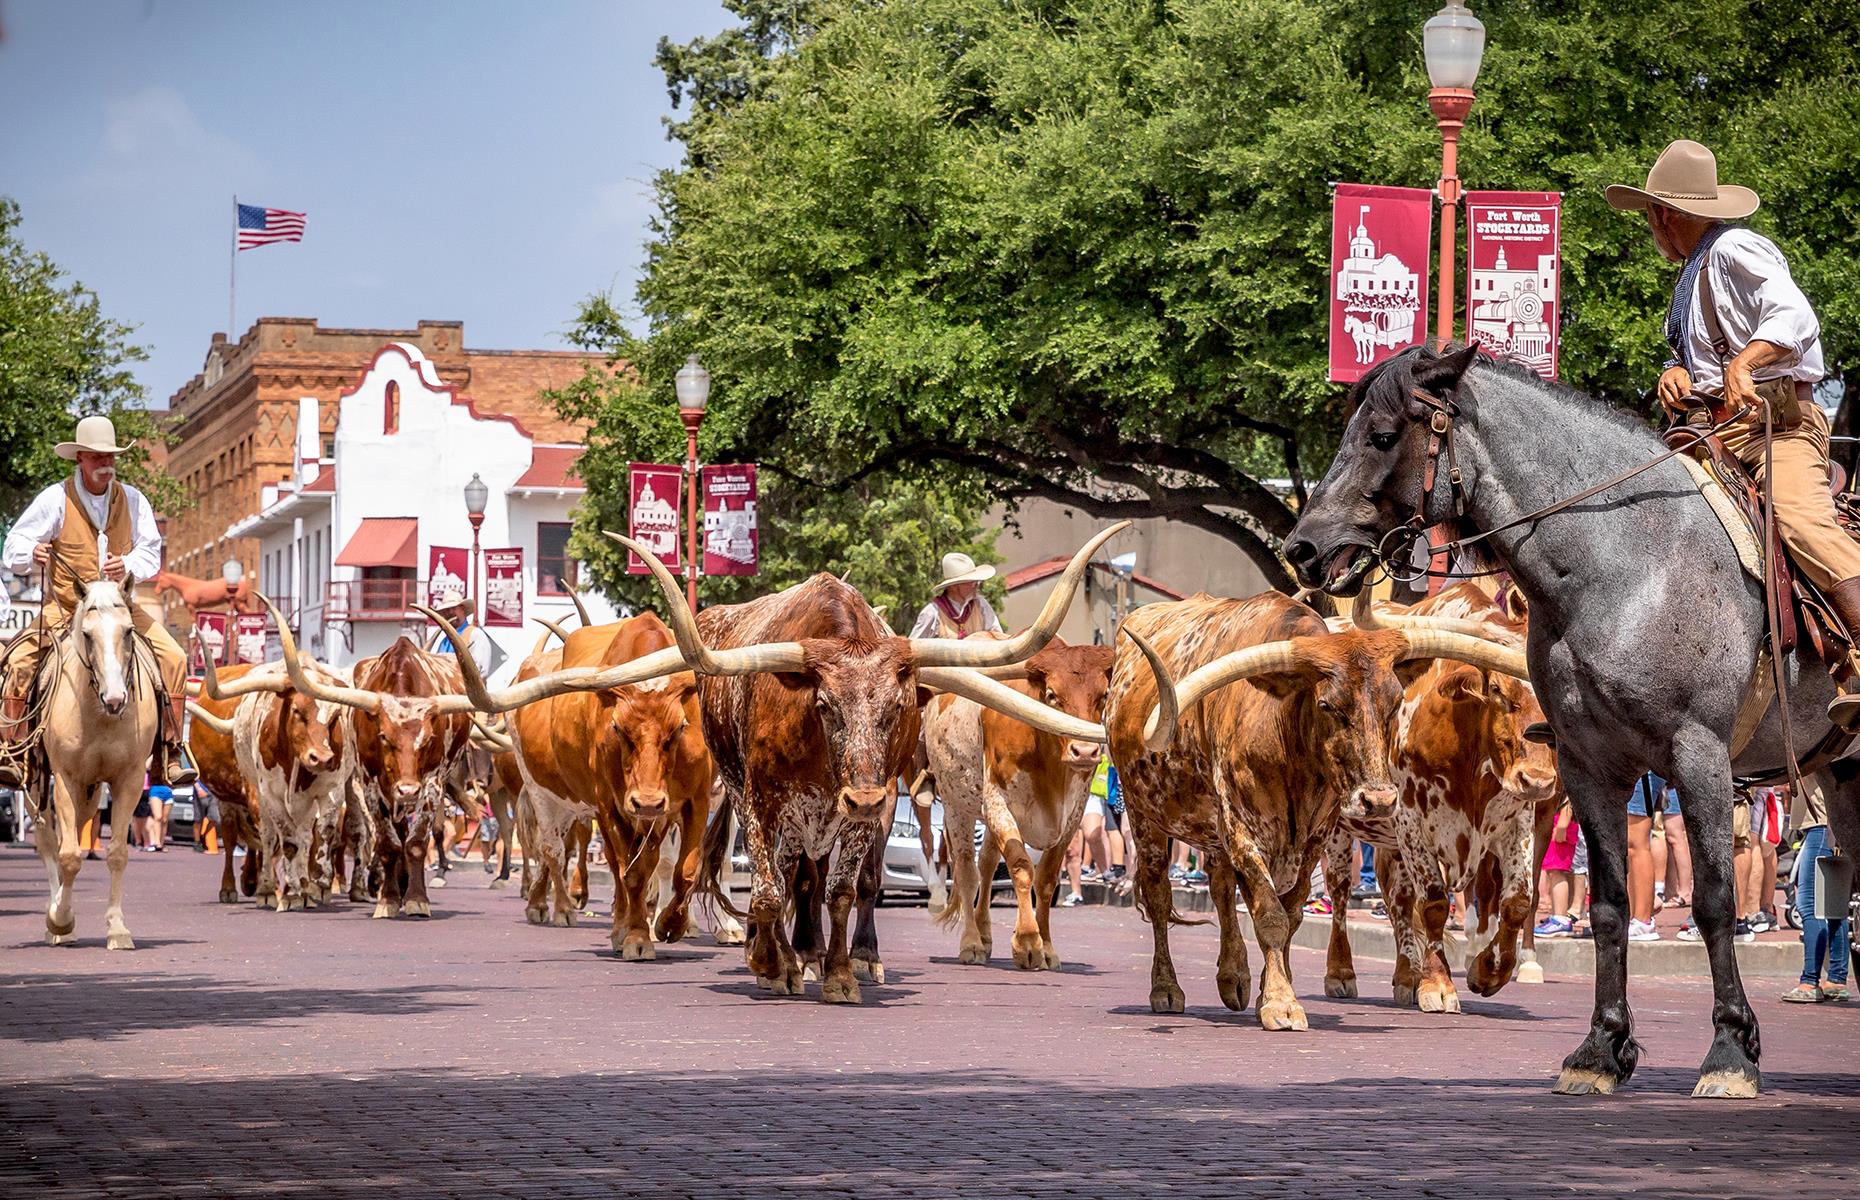 <p>If you happen to be in <a href="https://www.fortworthstockyards.org/">Fort Worth's Stockyards</a> at 11.30am and 4pm and see cattle roaming along East Exchange Avenue, there’s no need to be alarmed. Fort Worth’s herd of Texas longhorns at the city’s Stockyards is the only twice daily cattle drive in the world. And it’s managed by authentic Texan cowhands too. </p>  <p><strong><a href="https://www.loveexploring.com/gallerylist/82591/back-to-nature-amazing-animal-encounters-in-every-state">Discover more amazing animal encounters in every state</a></strong></p>